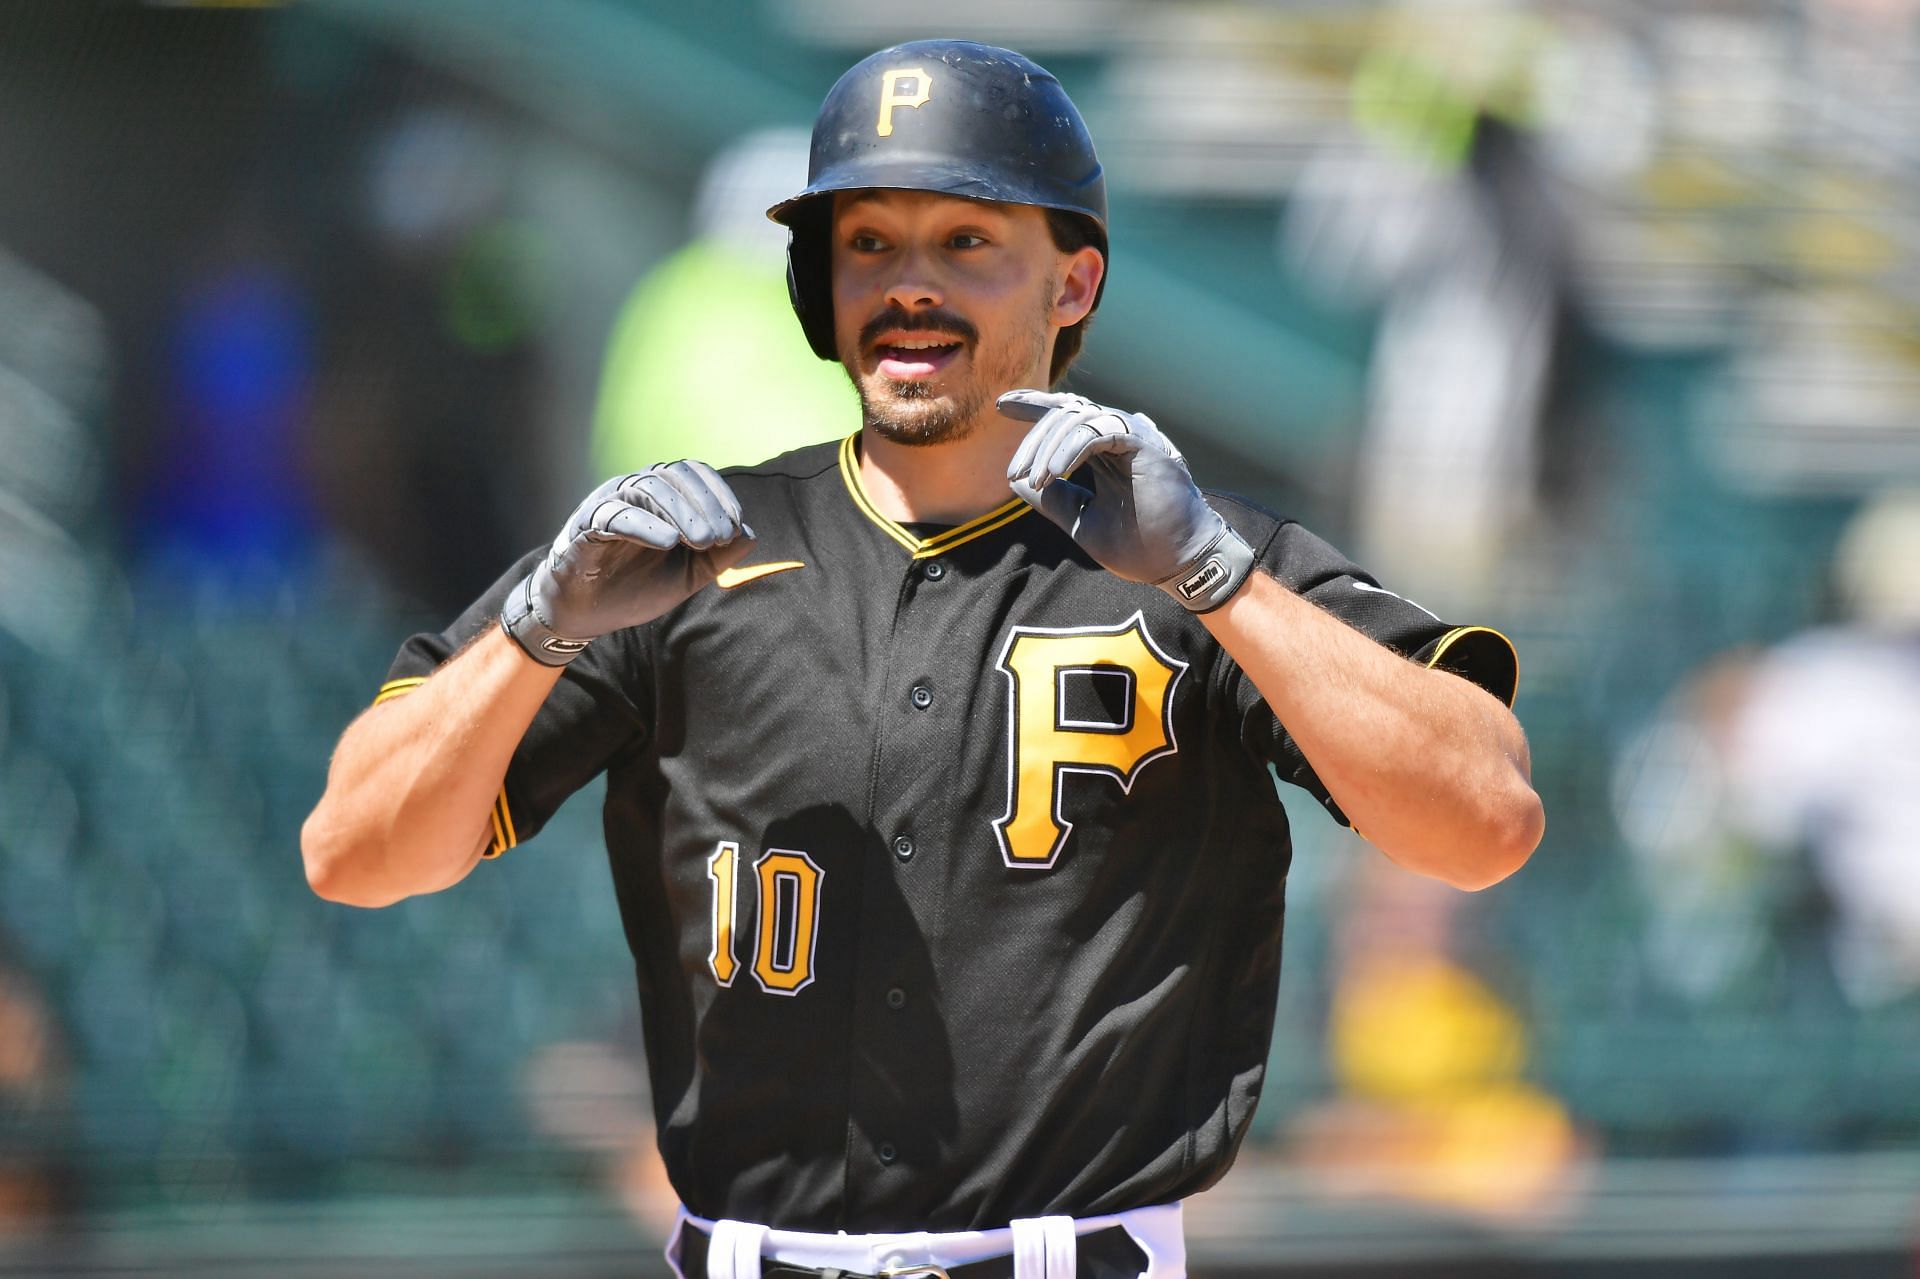 Sources: Pirates have agreement in place with Yoshi Tsutsugo for 2022